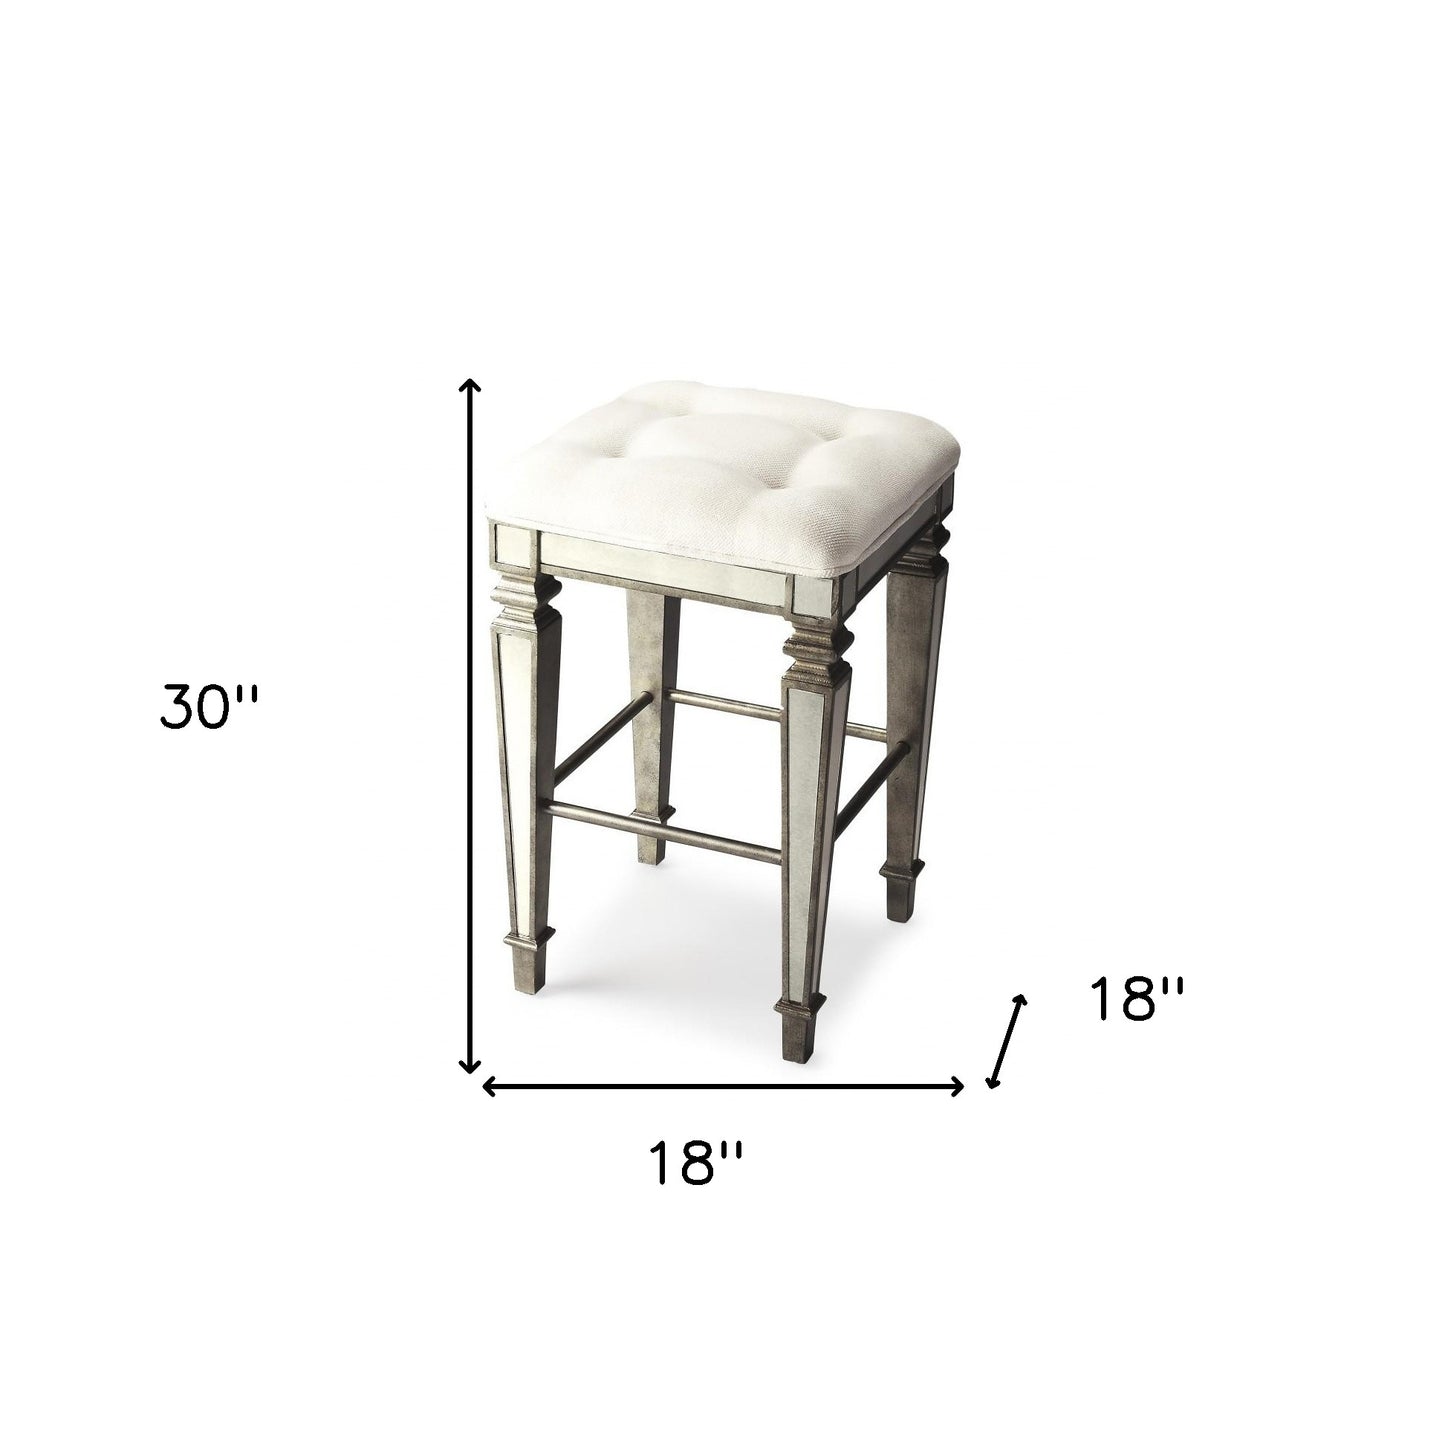 30" White And Silver Backless Counter Height Bar Chair